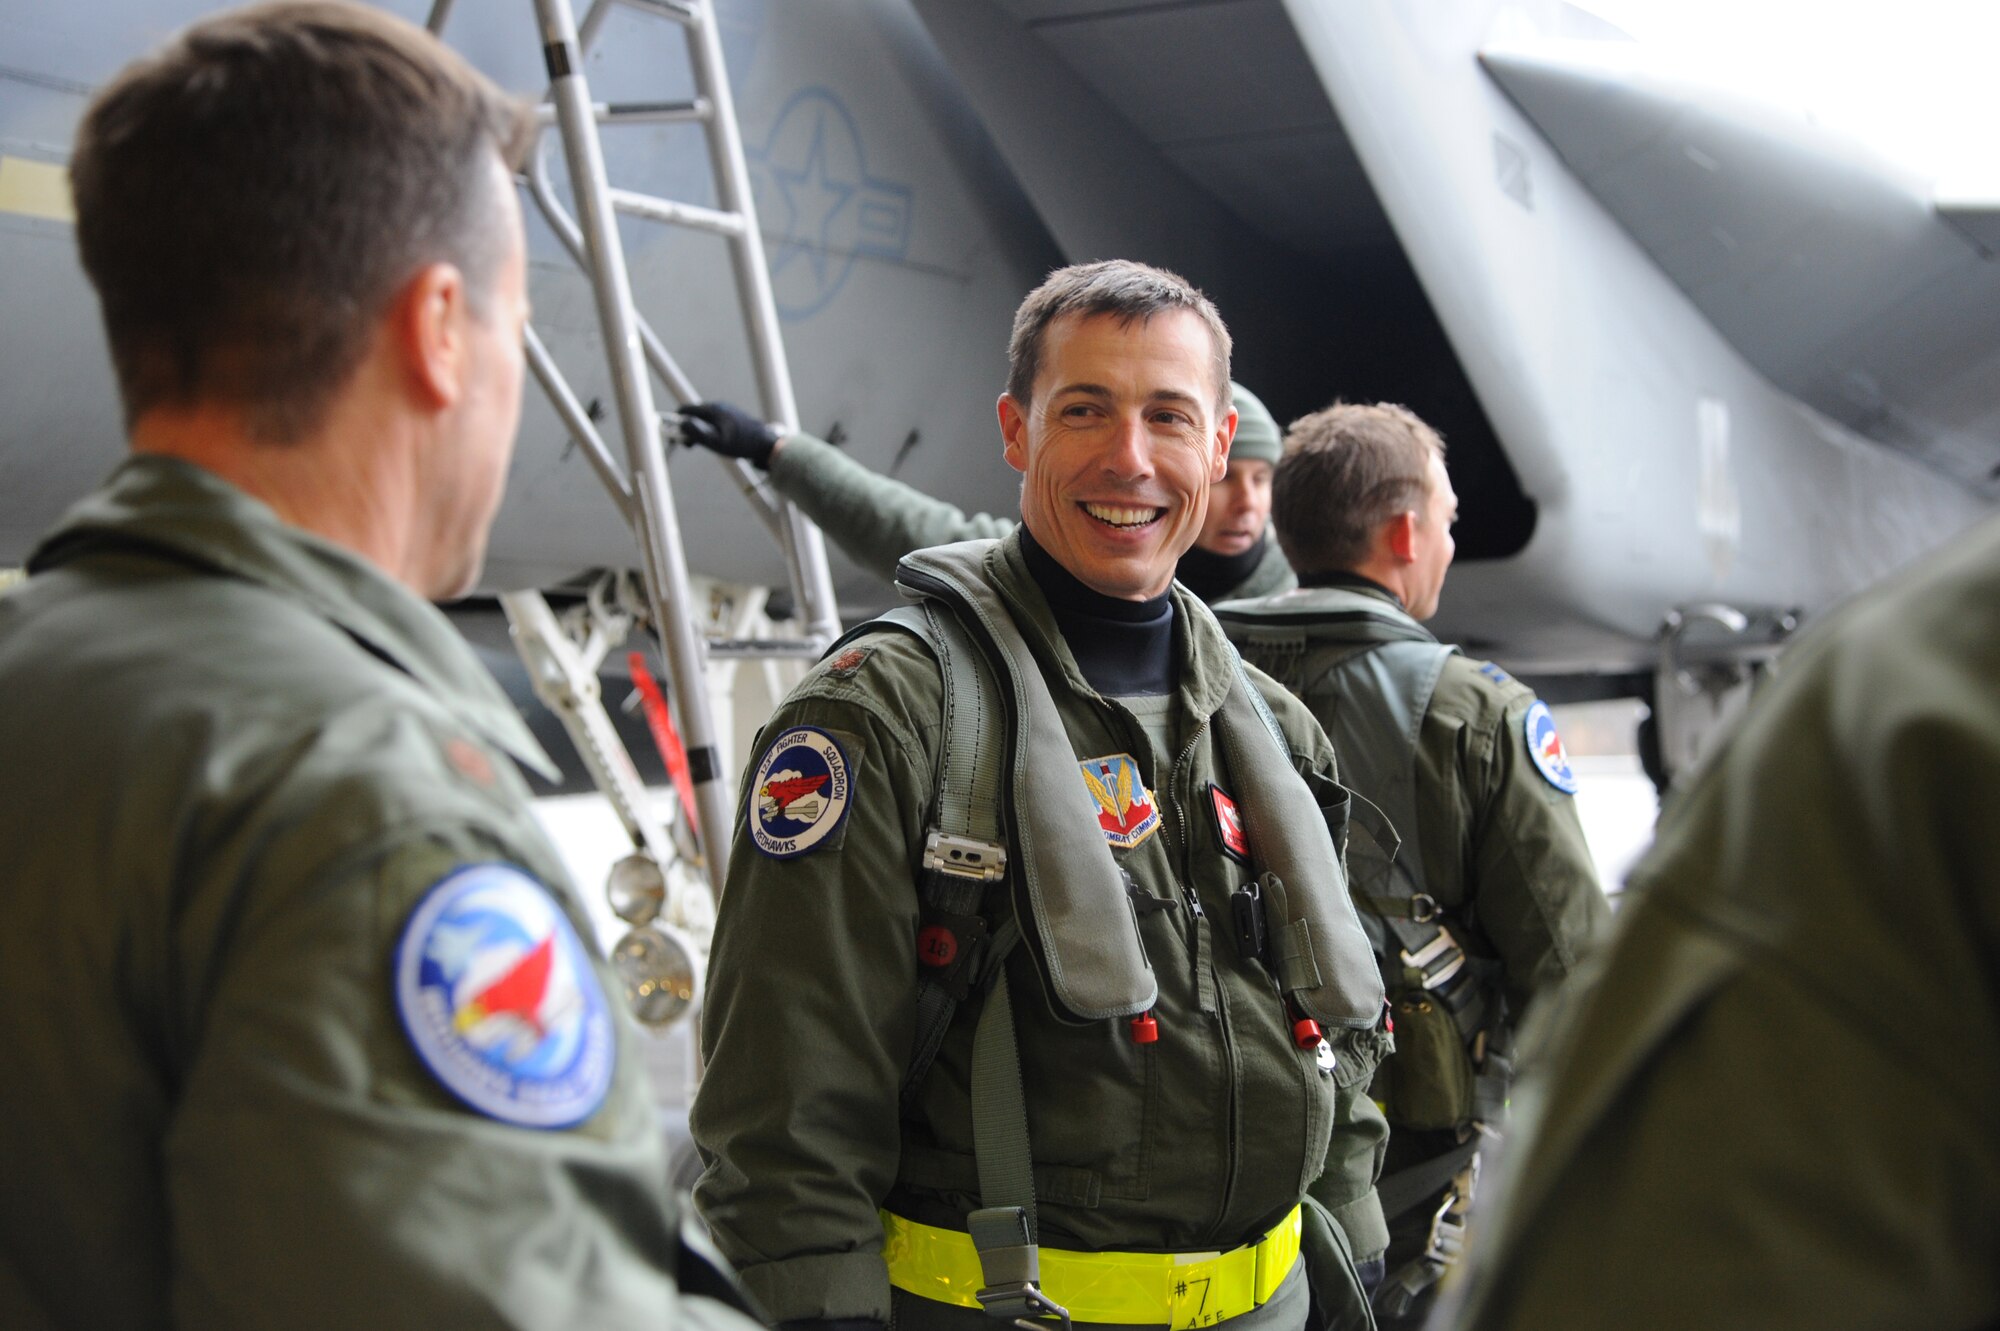 Maj. Nathan Rice, 123rd Fighter Squadron, is greeted as he returns from his mission in support of Exercise Vigilant Shield 2017, Yellowknife, Northwest Territories, Oct. 20, 2016.  During this exercise, forces supporting North American Aerospace Defense Command (NORAD) will deploy and conduct air sovereignty operations in the far north and the high Arctic demonstrating the ability to detect, identify and meet possible threats in some of the most remote regions in the world.  (U.S. Air National Guard photo by Senior Master Sgt. Shelly Davison, 142nd Fighter Wing Public Affairs)